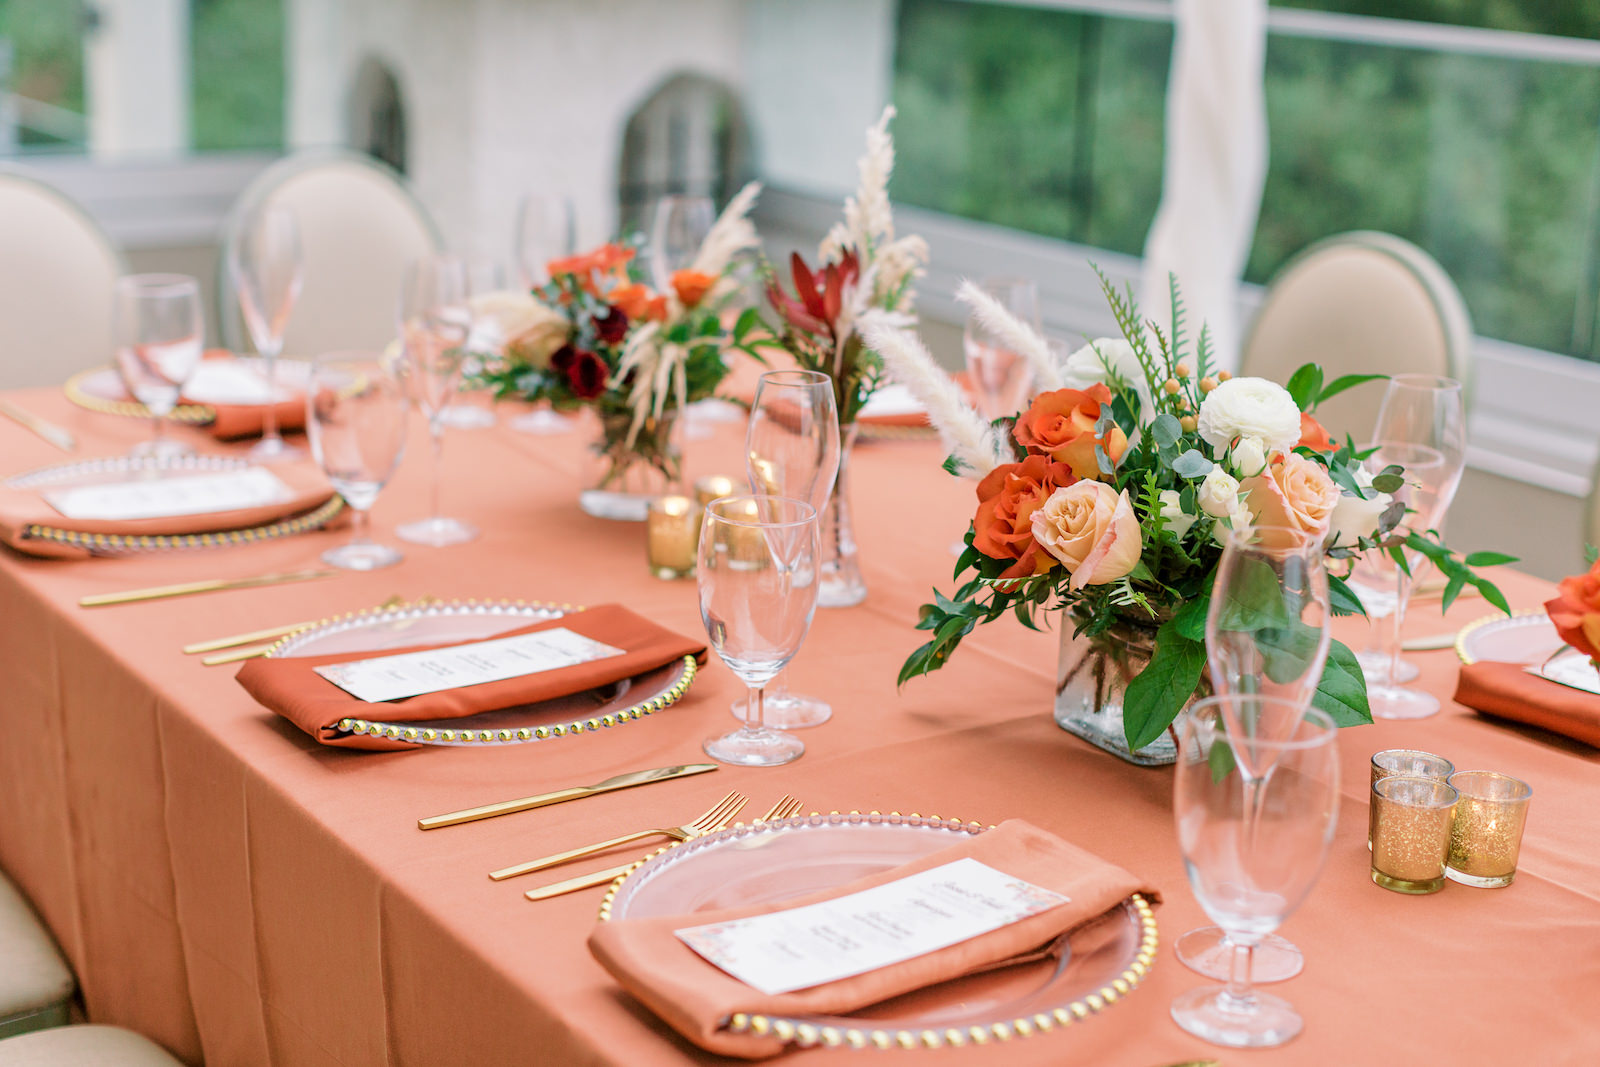 Copper Orange Wedding Reception Table Linens with Gold Beaded Glass Charger Plates topped with Napkin and Menu Card with Gold Flatware | Fall Autumn Wedding Centerpiece with Orange and Peach Roses and Pampas Grass